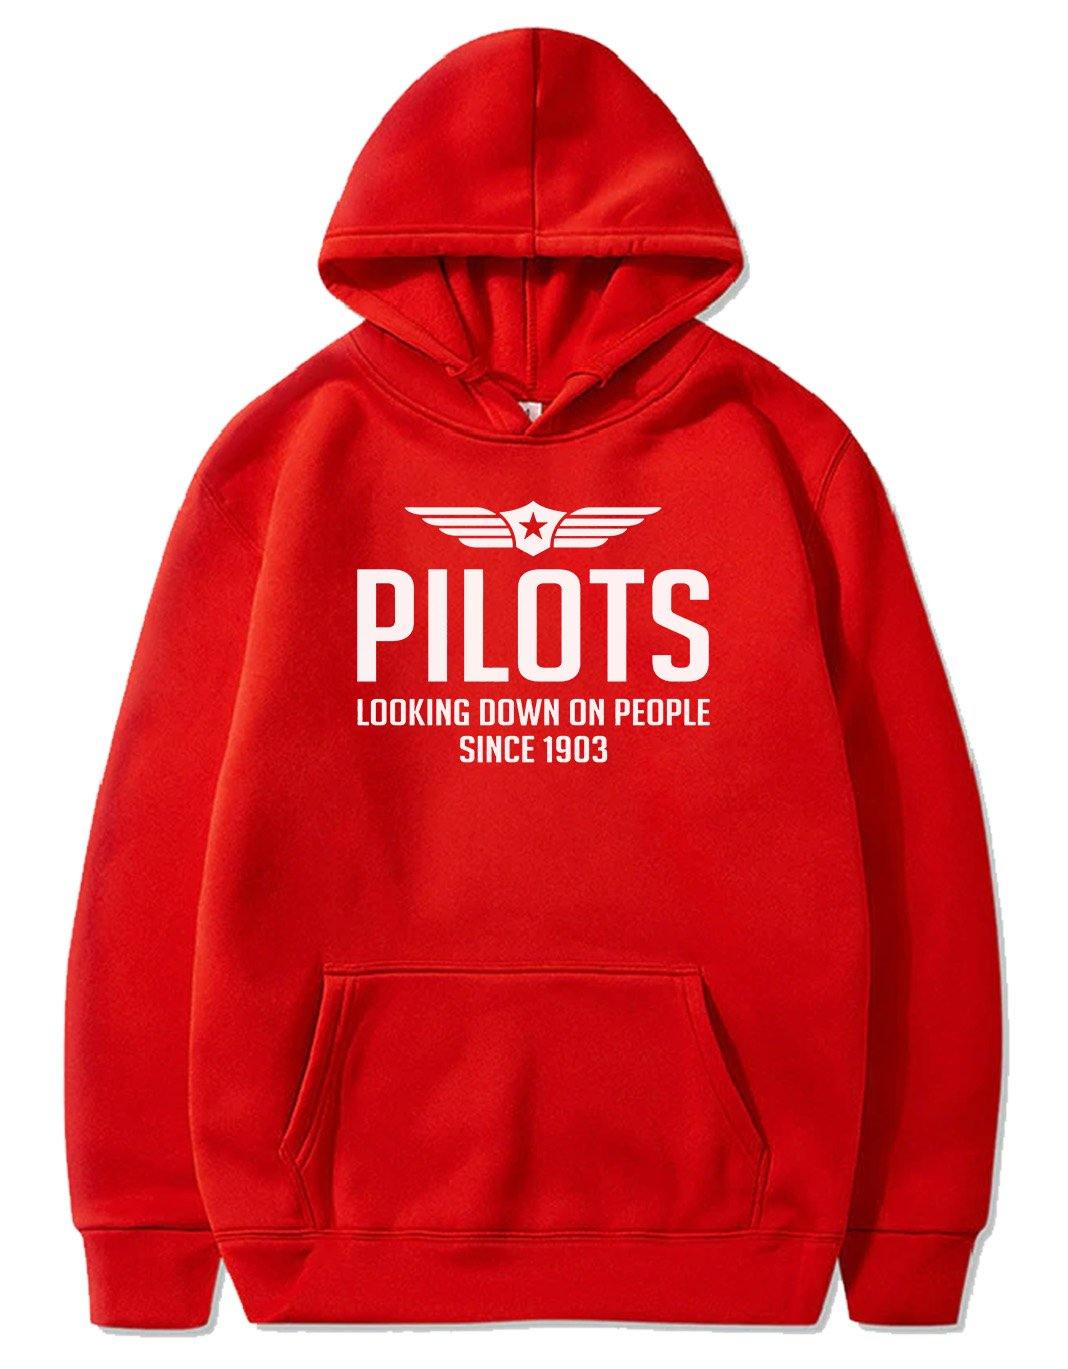 PILOTS LOOKING DOWN ON PEOPLE SINCE 1903  PULLOVER THE AV8R